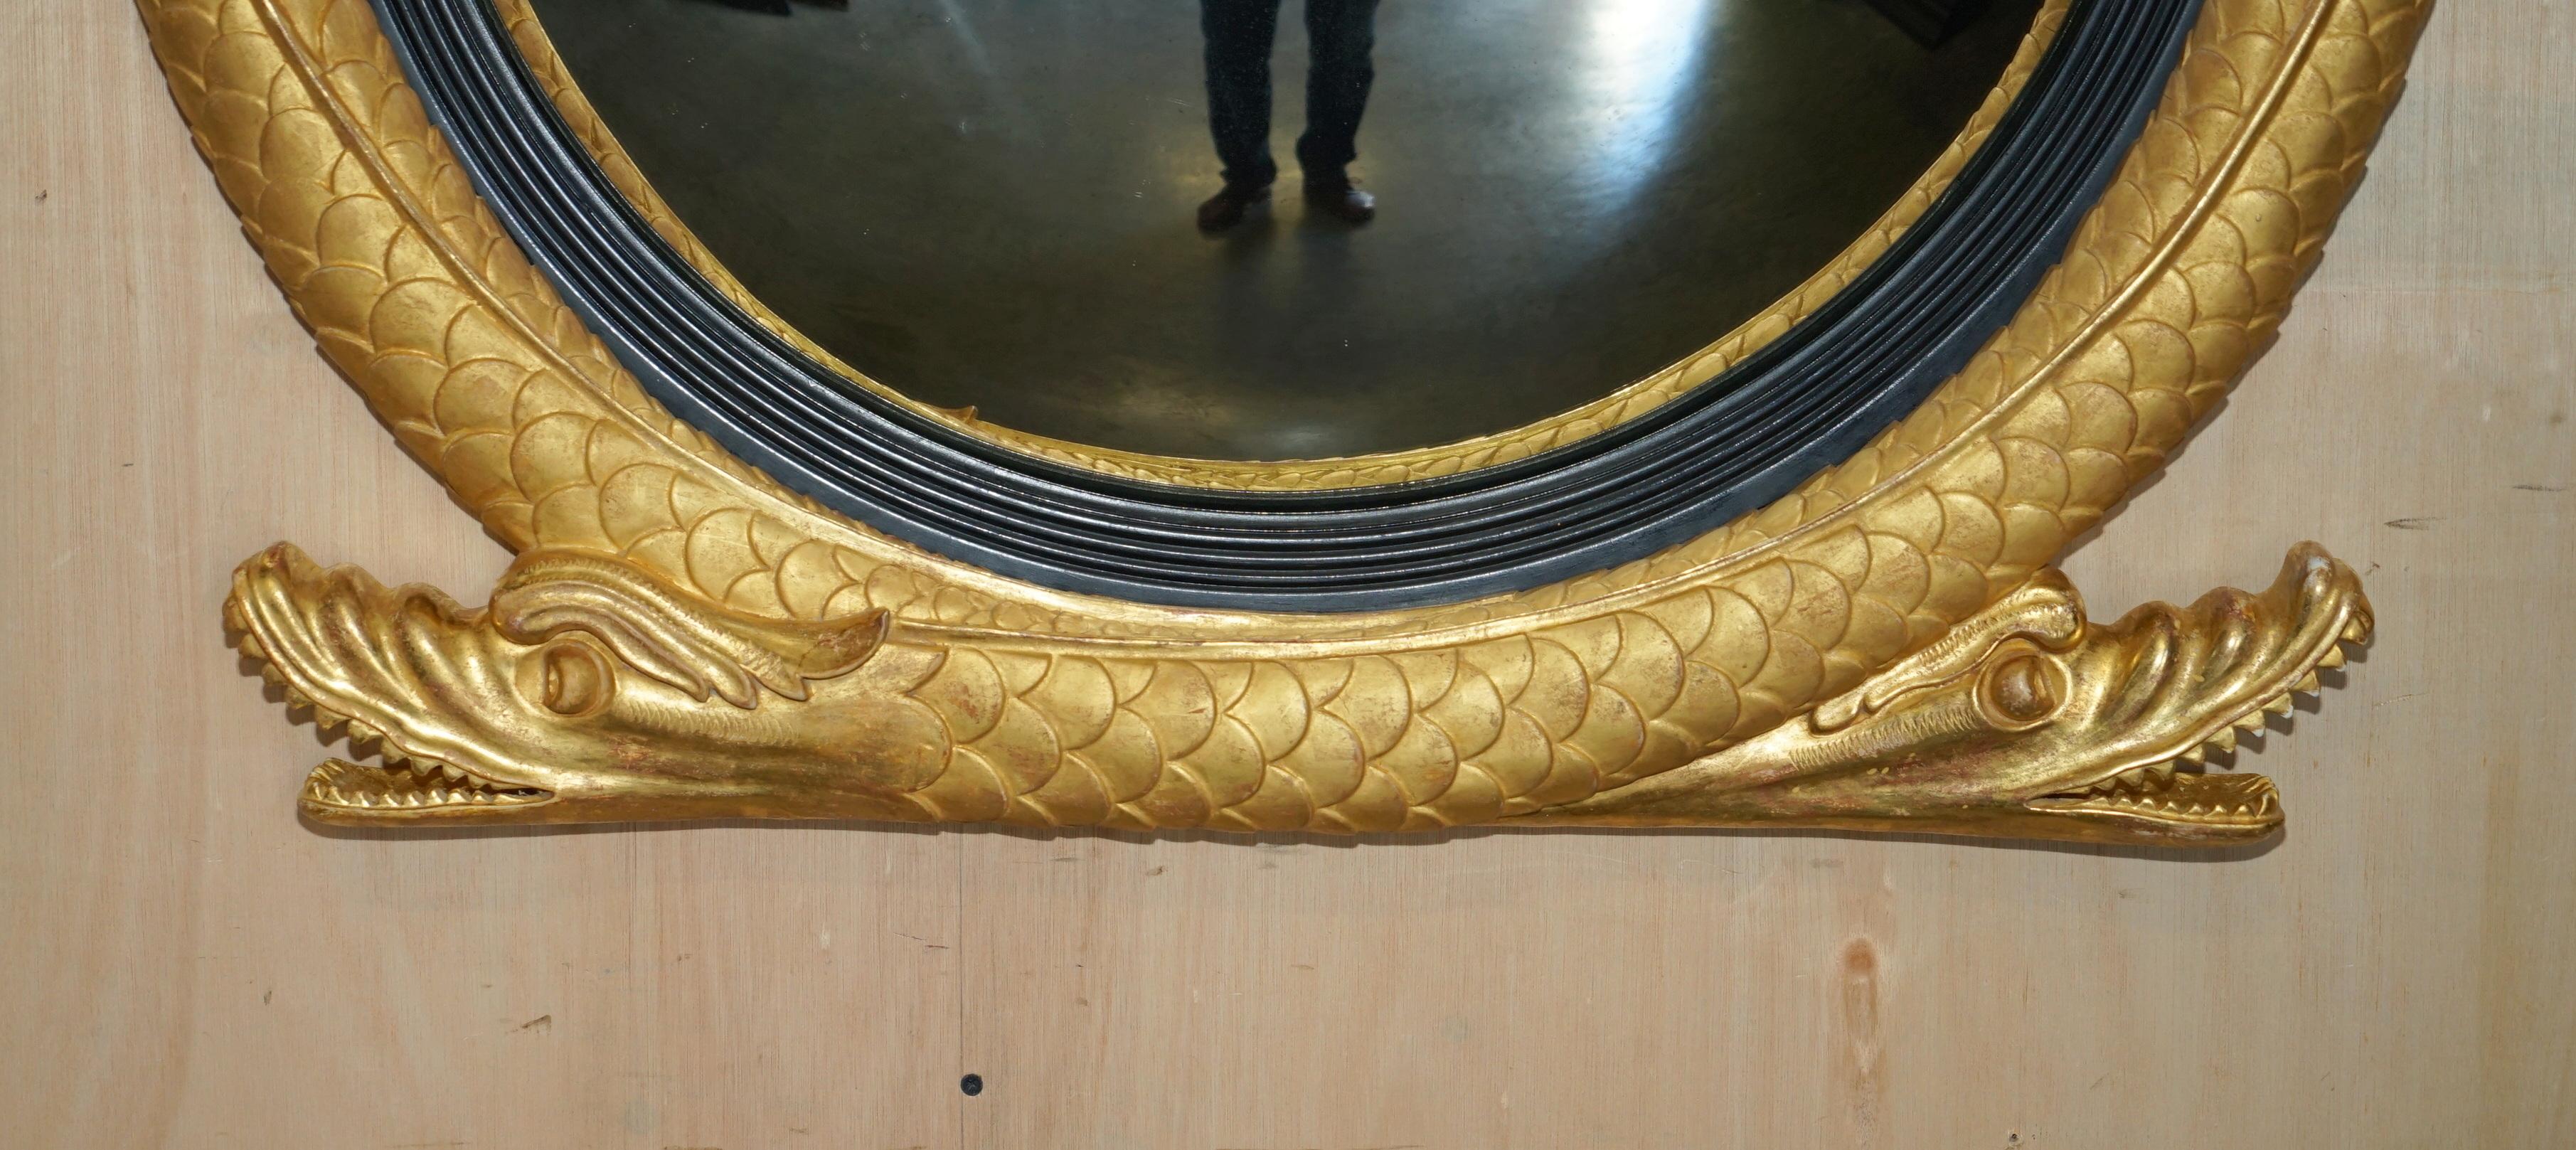 Hand-Crafted PAIR OF EXTRA LARGE STUNNING REGENCY STYLE GOLD GILT TWIN SERPENT CONVEX MiRRORS For Sale